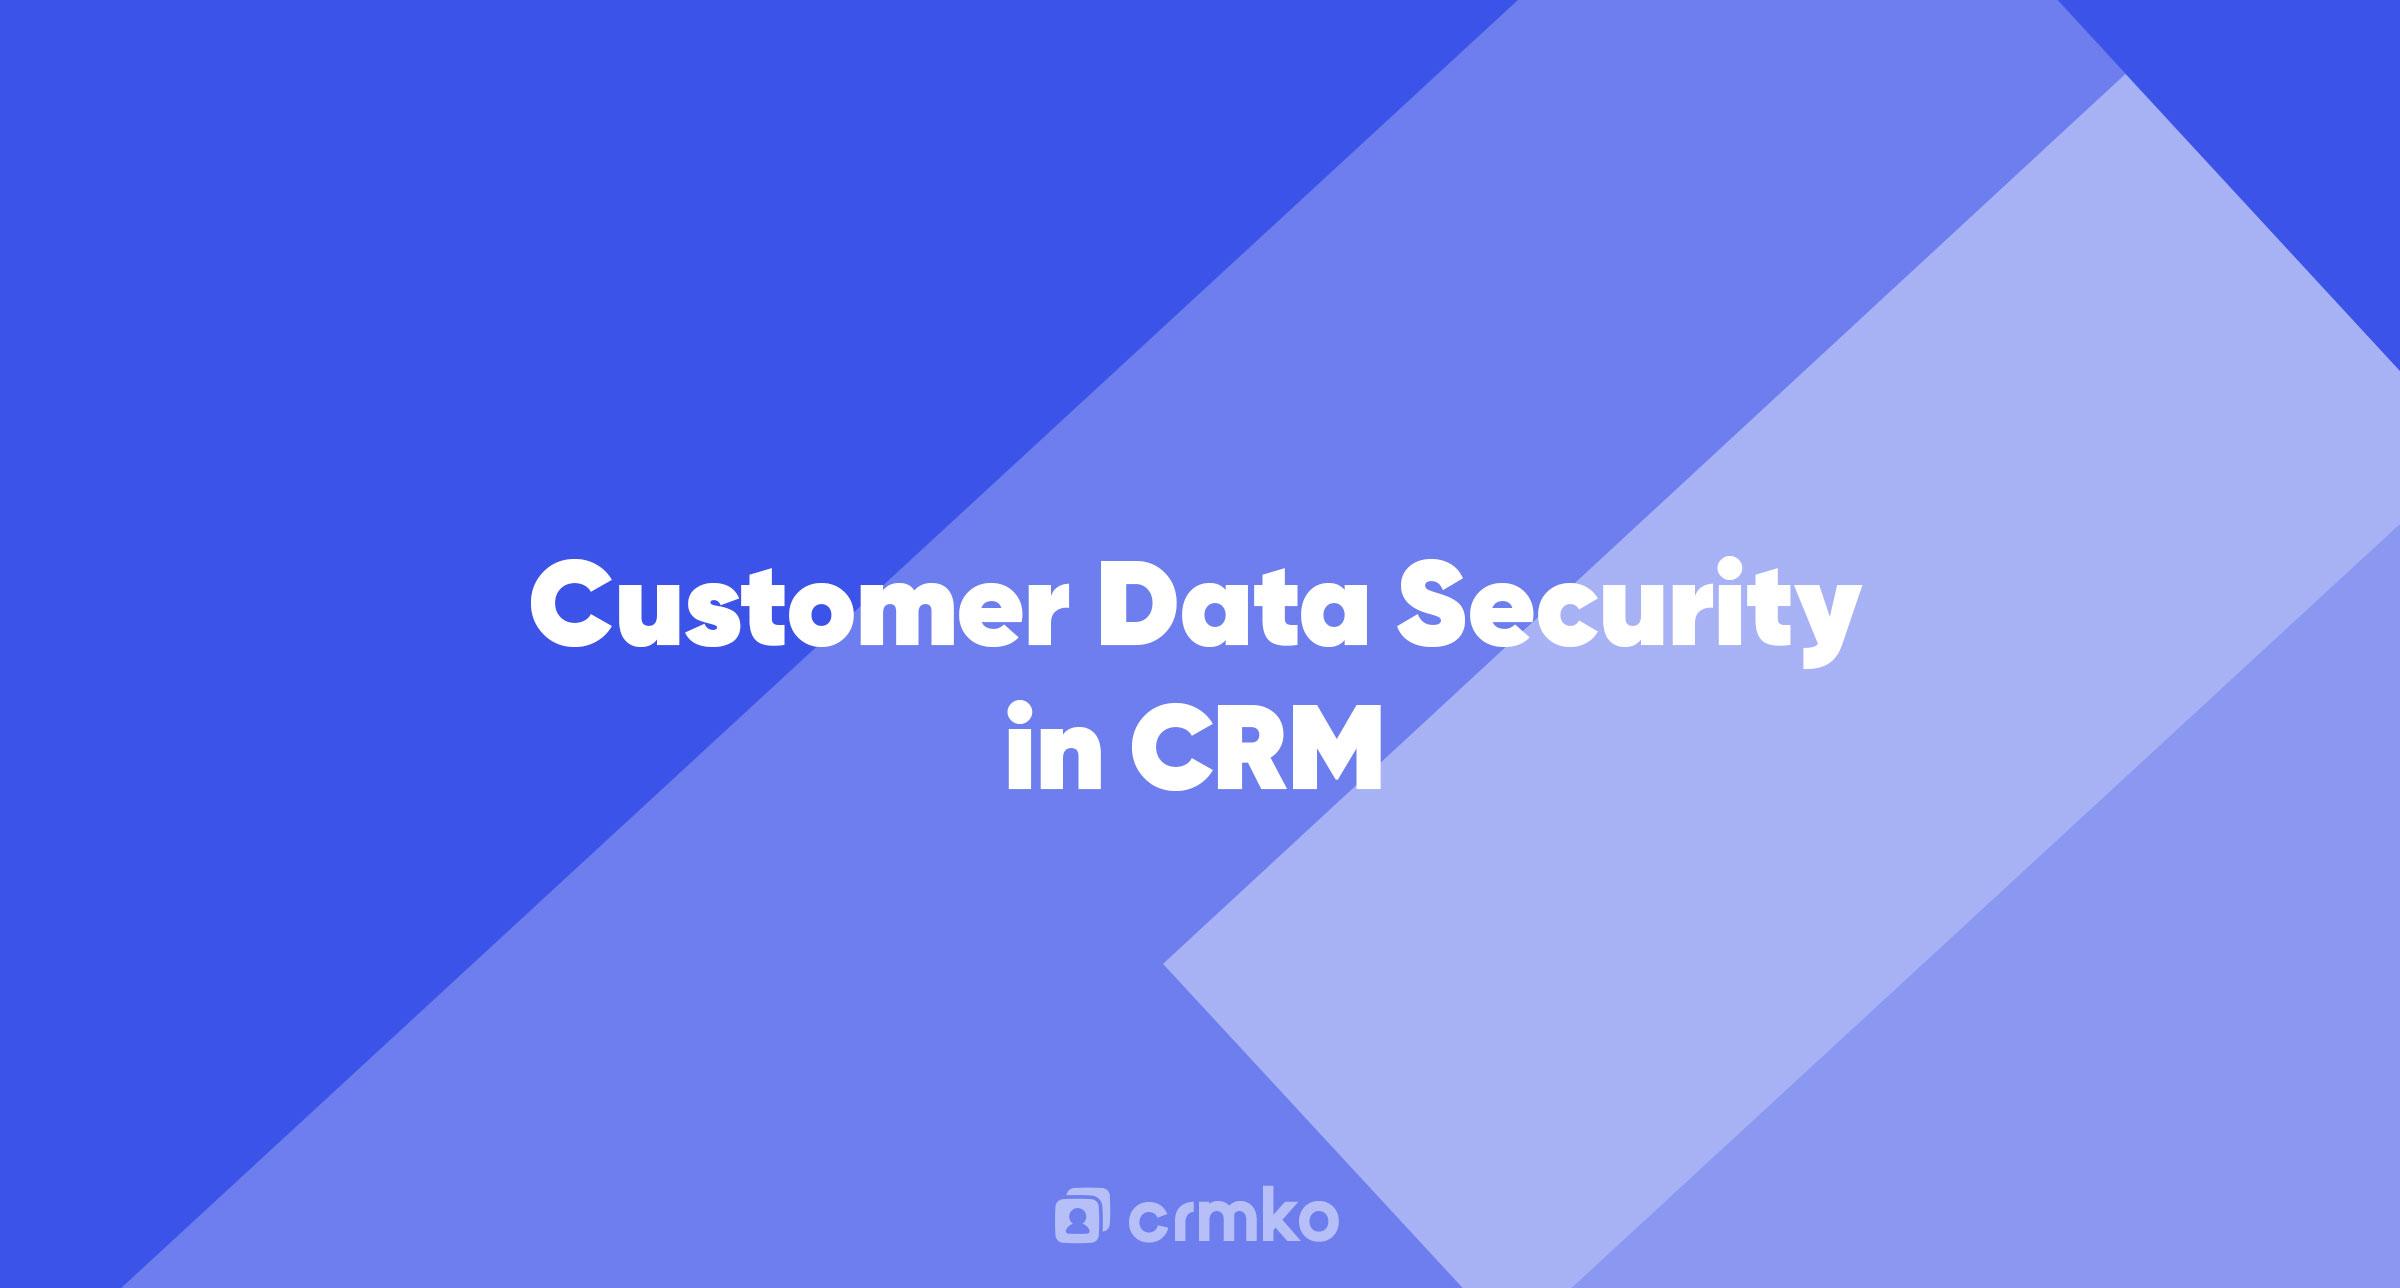 Article | Customer Data Security in CRM